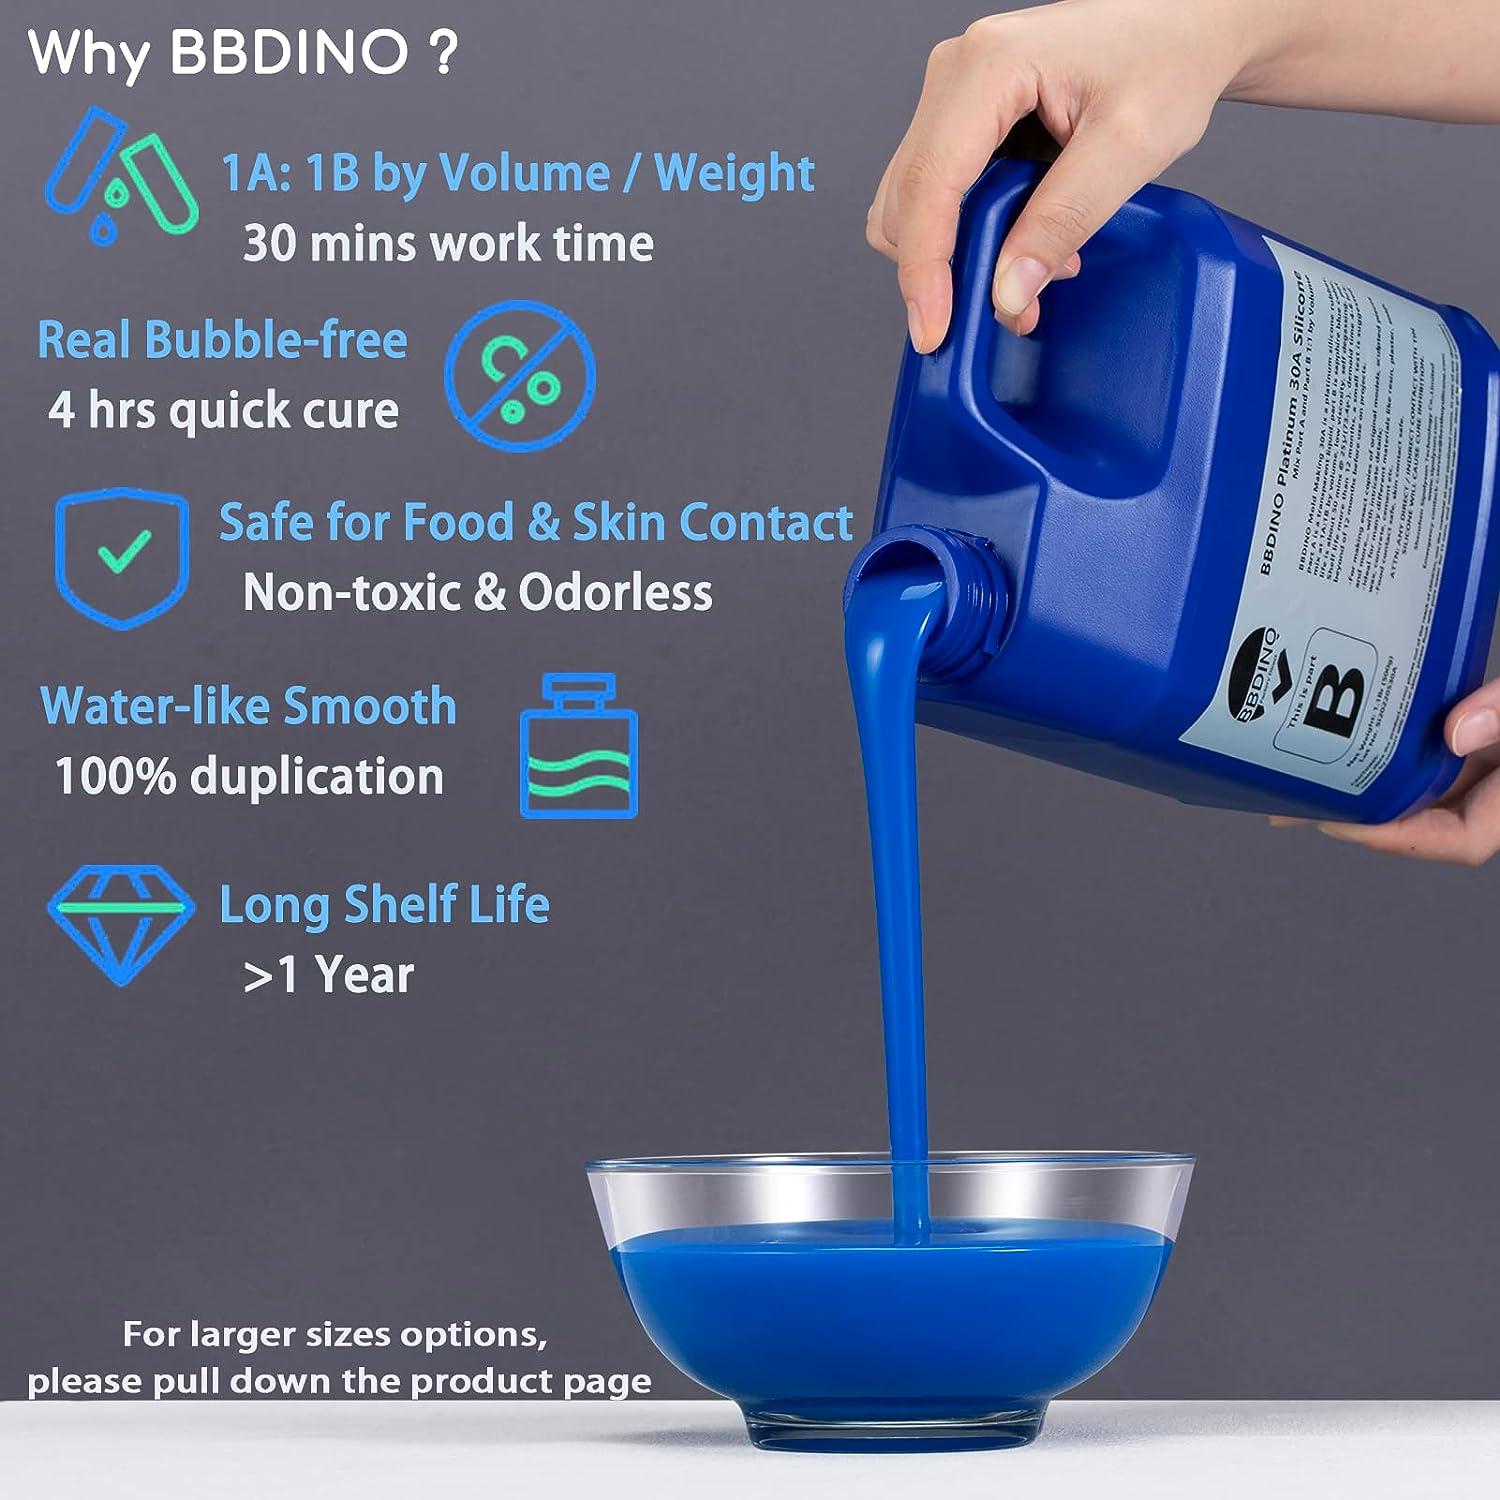 BBDINO Silicone Mold Making Kit, Mold Making Silicone Rubber N.W